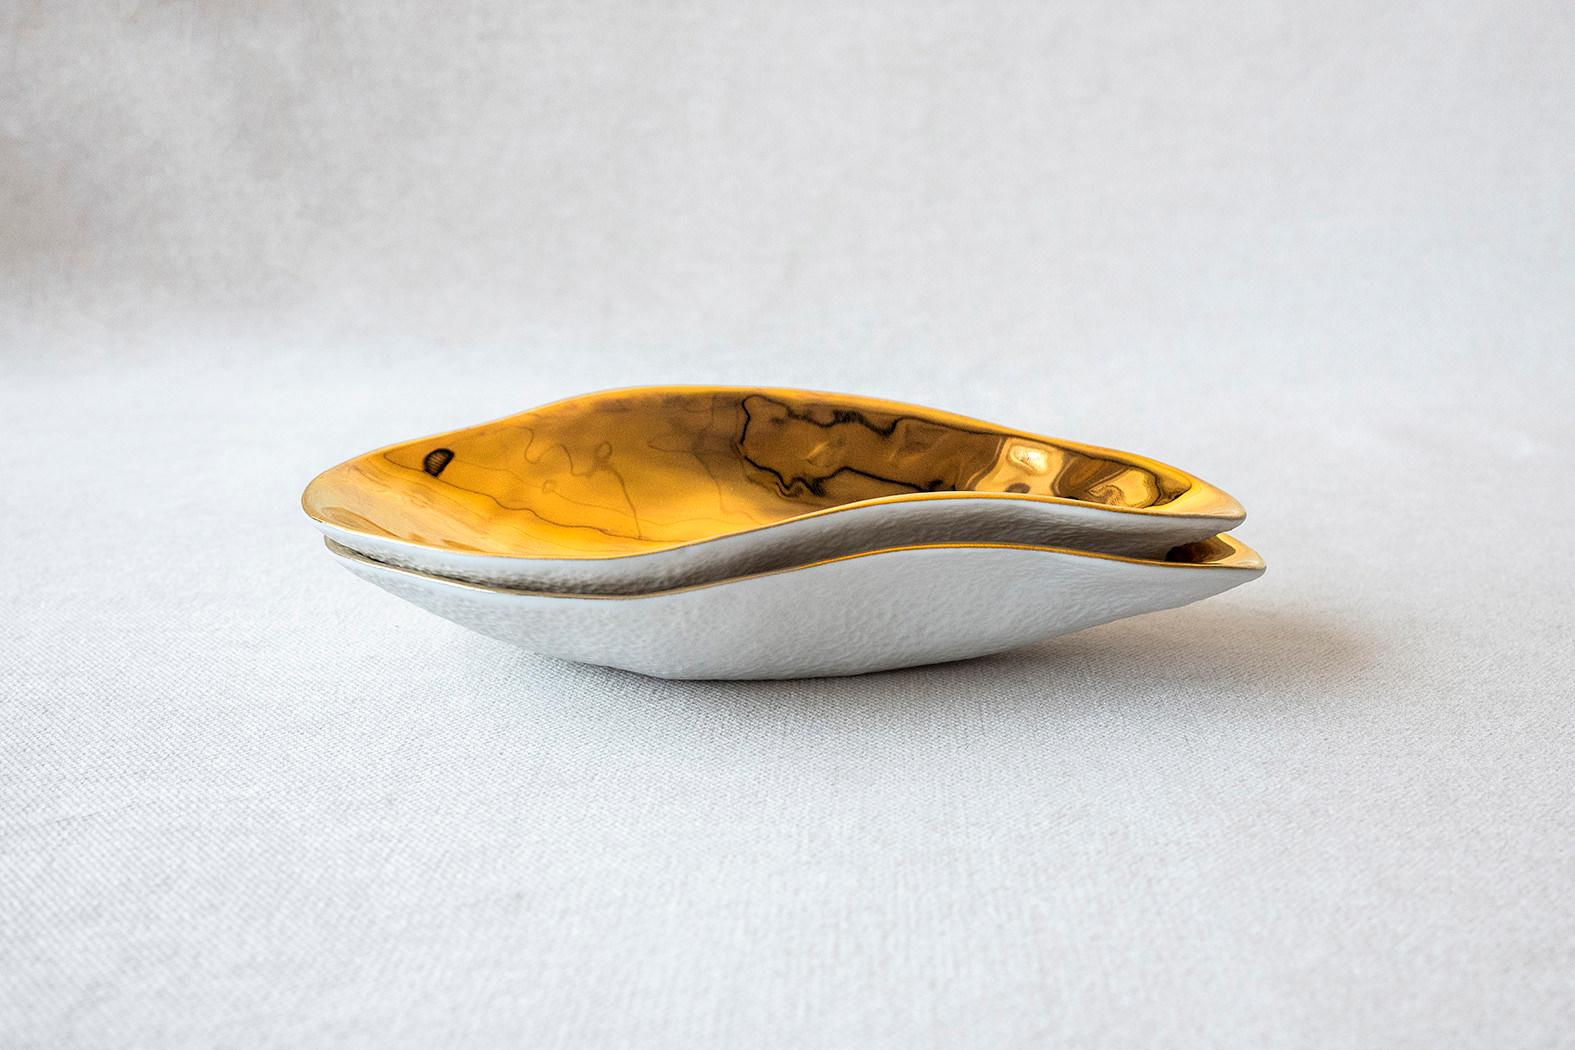 • Set of 4 small porcelain side dishes
• 16cm x 8,5cm x 3cm
• perfect for a sexy amuse-bouche, a pre-dessert or side dish
• for that sexy dinner party
• with a very luxurious 24k hand painted golden surface
• textured bottom
• designed in